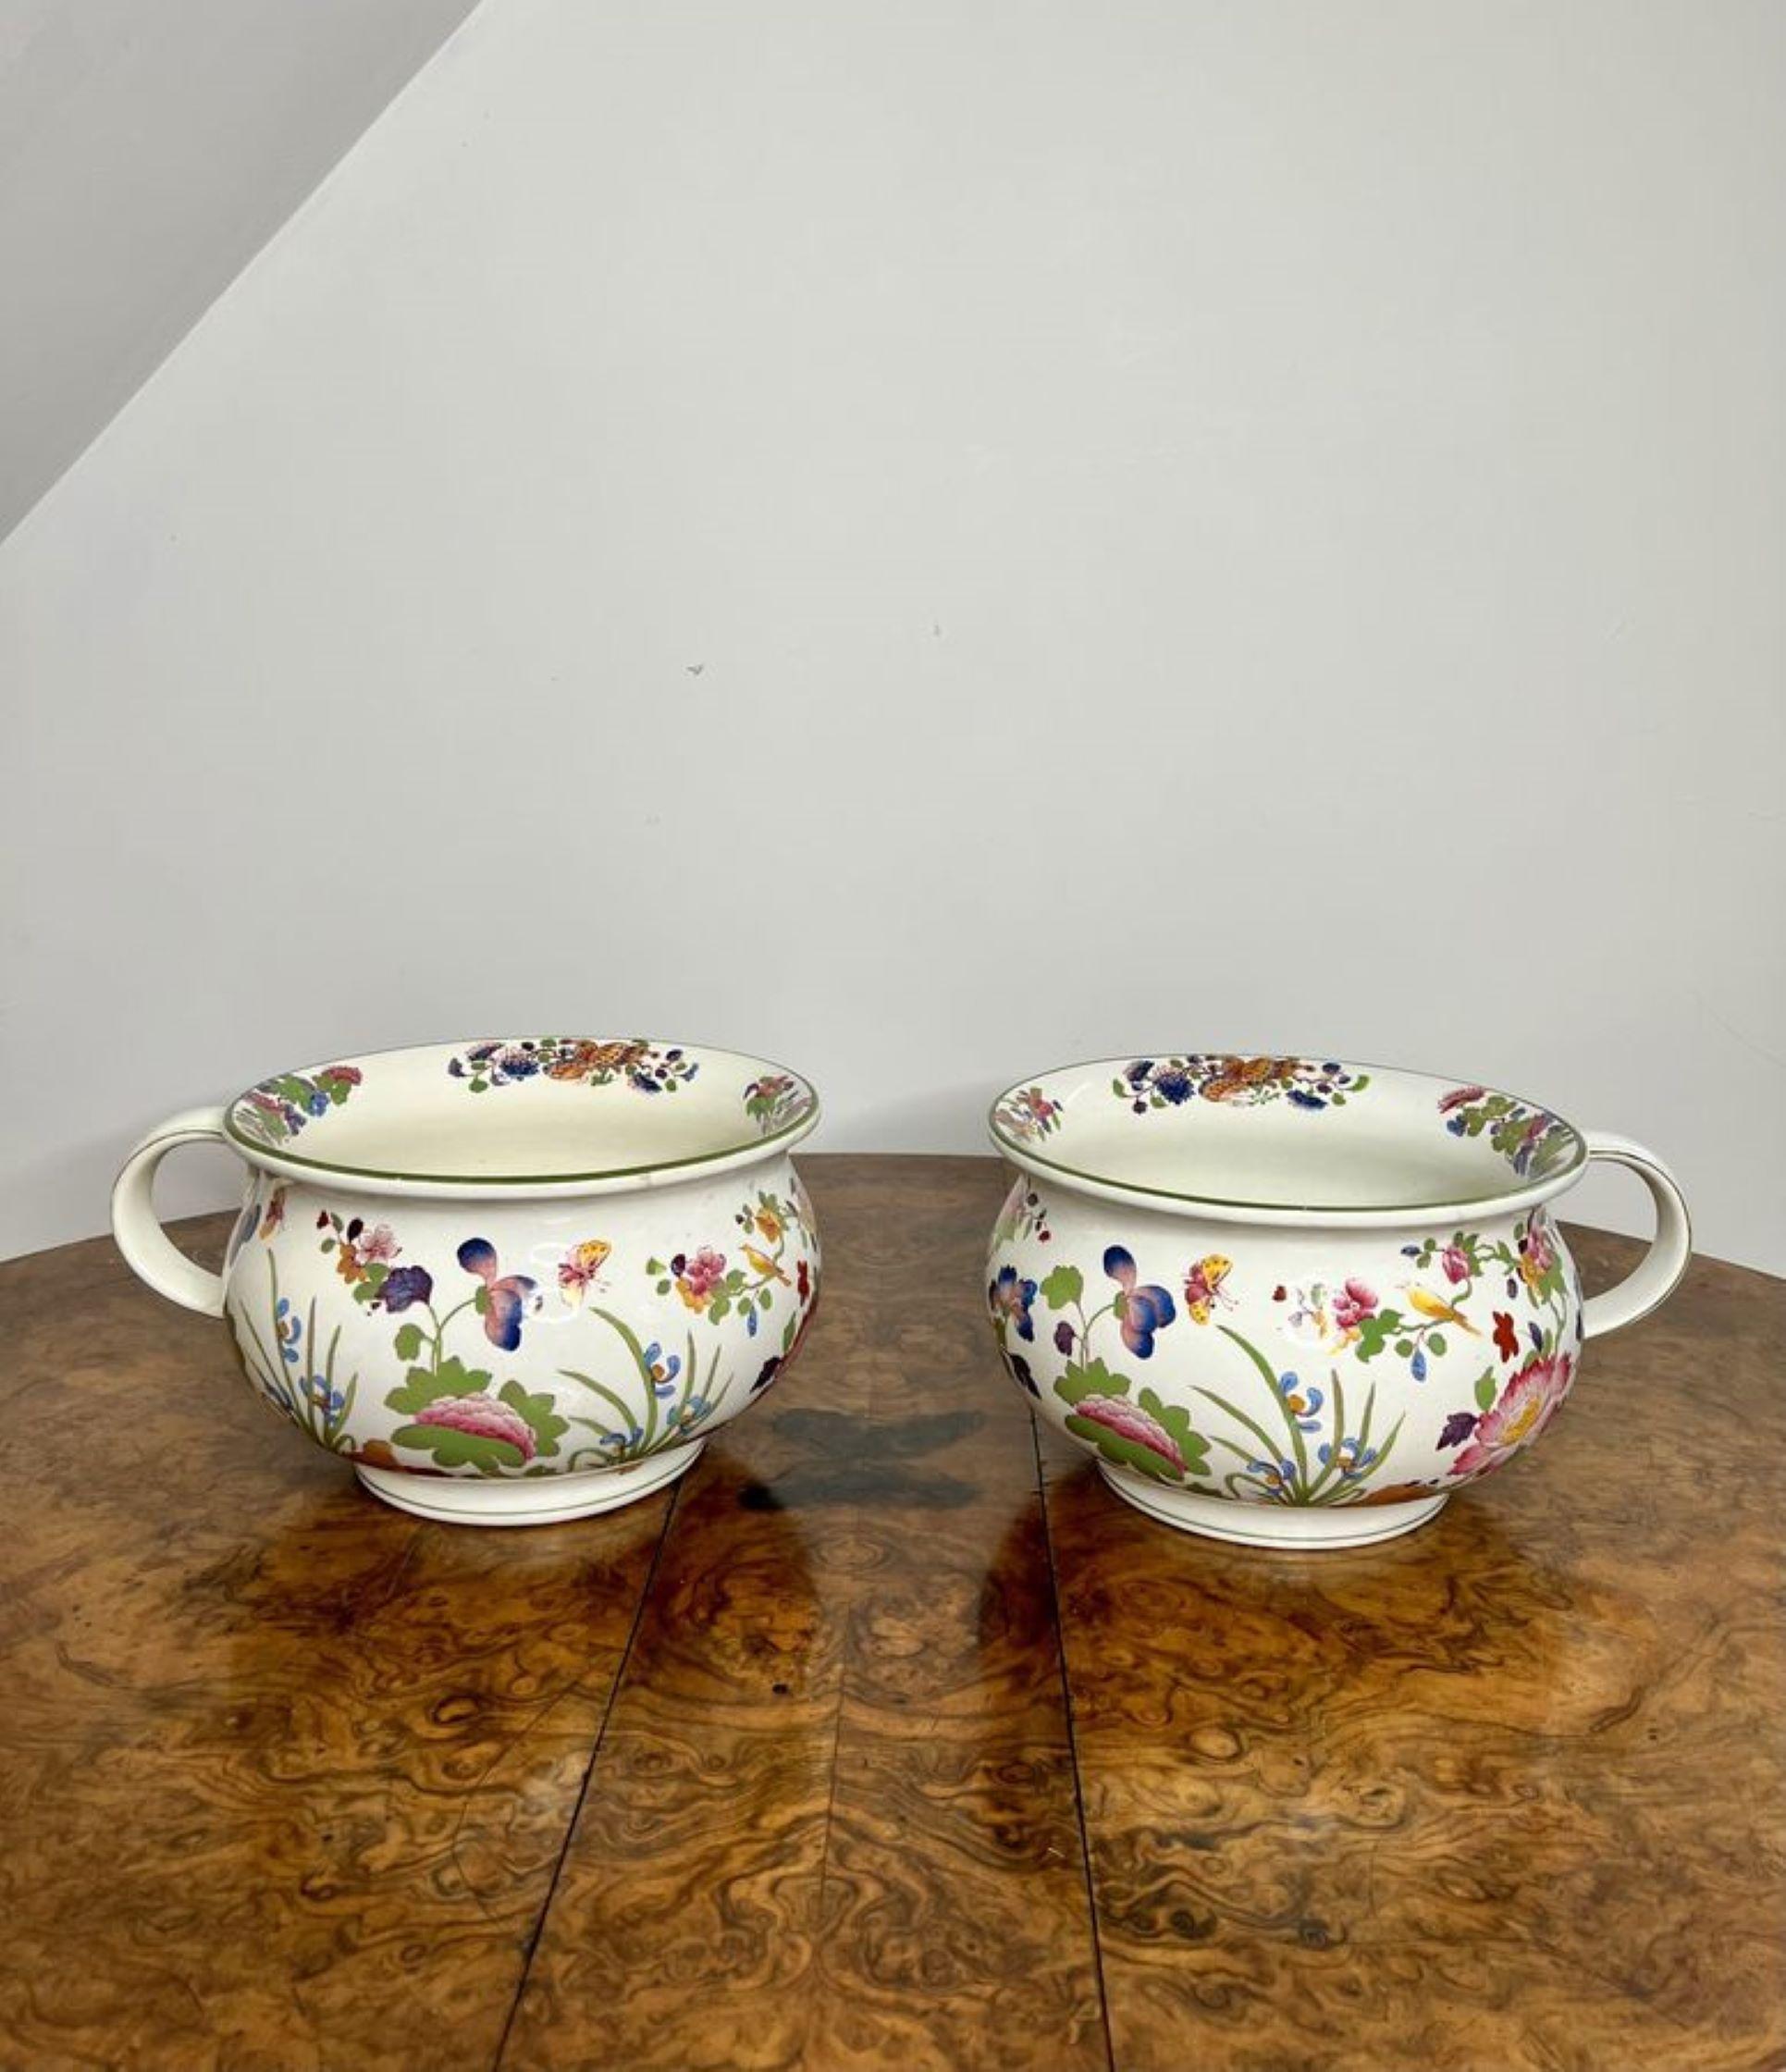 Stunning quality antique Edwardian Wedgwood Etruria ceramic bathroom set, comprising of a jug and bowl, two chamber pots, a toothbrush holder and a soap dish, with a cream ground ground and floral decoration throughout in fantastic green, pink,